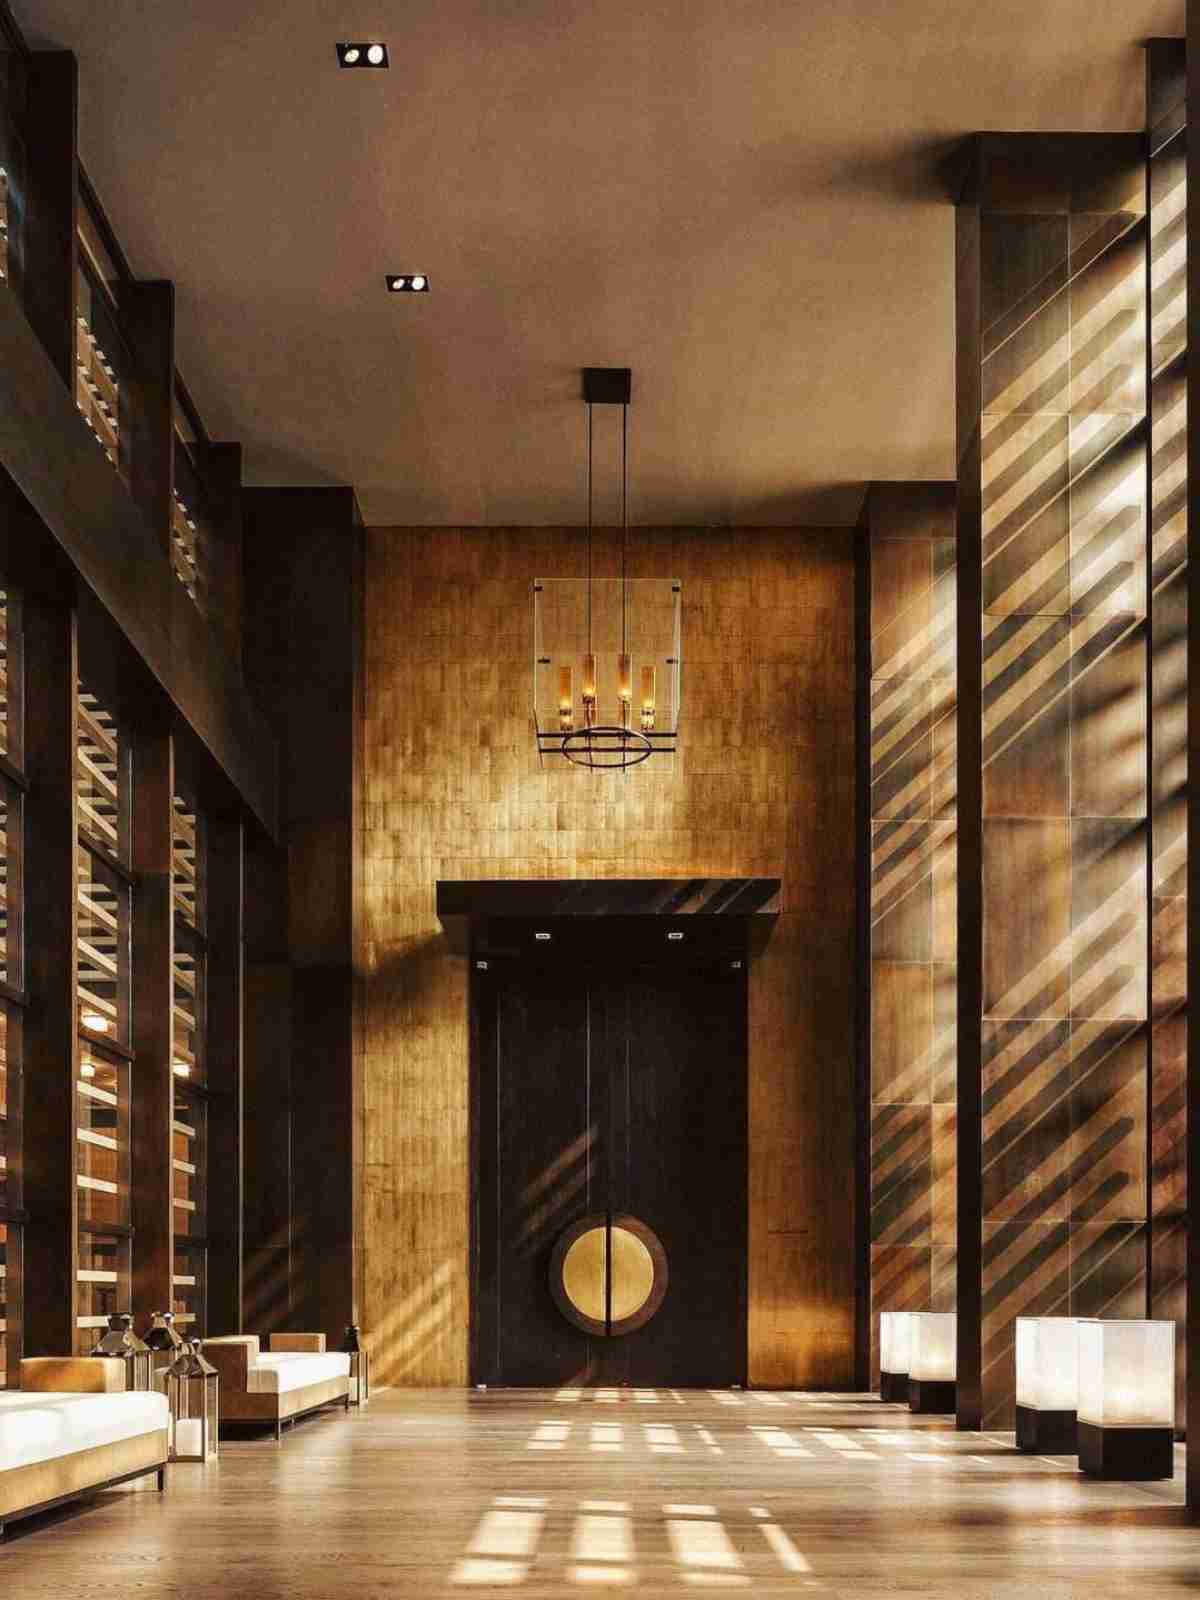 The lobby of Rosewood Hotel Beijing